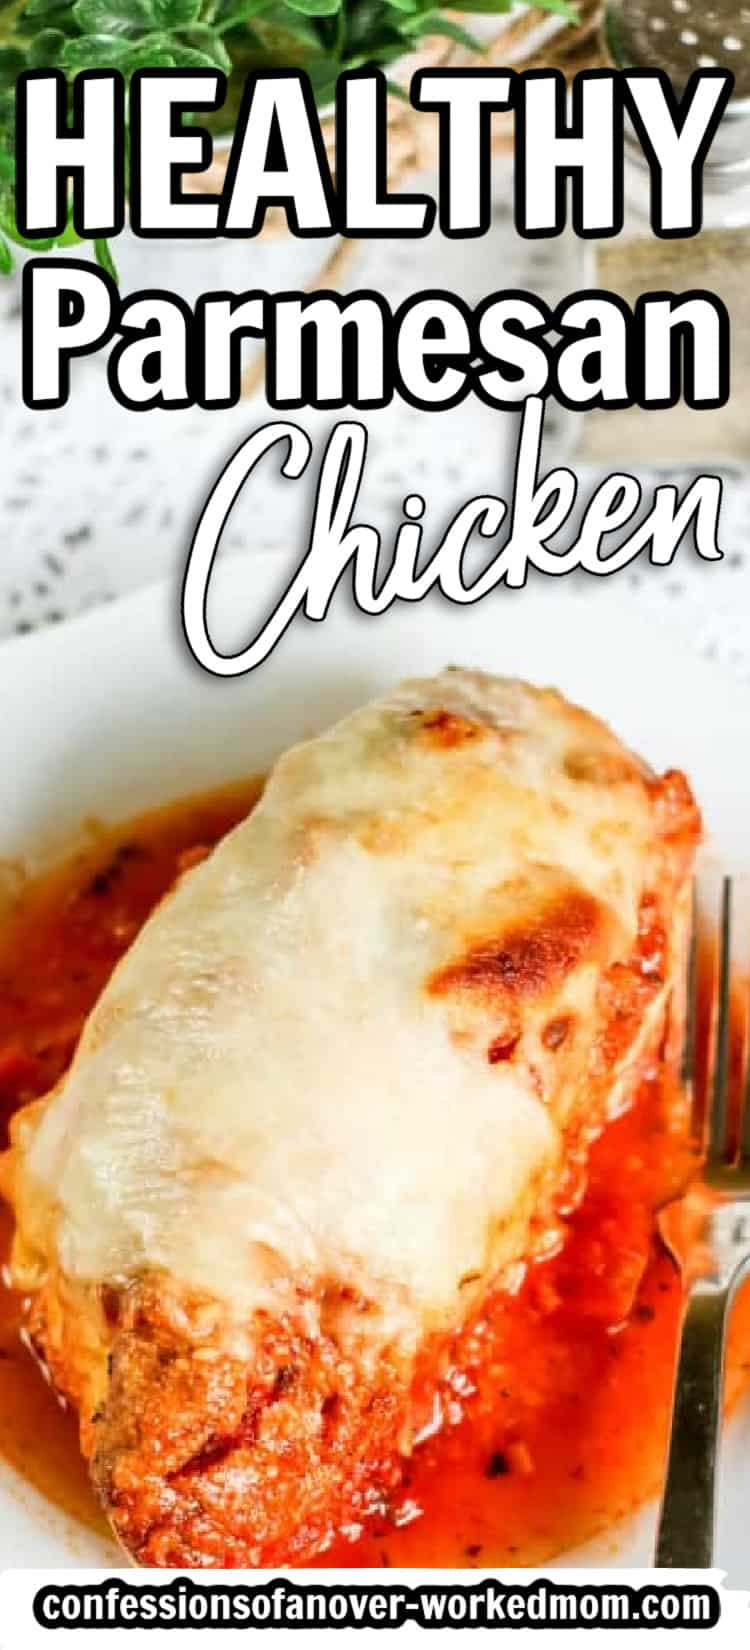 You are going to love this healthy Parmesan chicken recipe! A traditional crispy Parmesan chicken recipe is deep-fried and breaded.